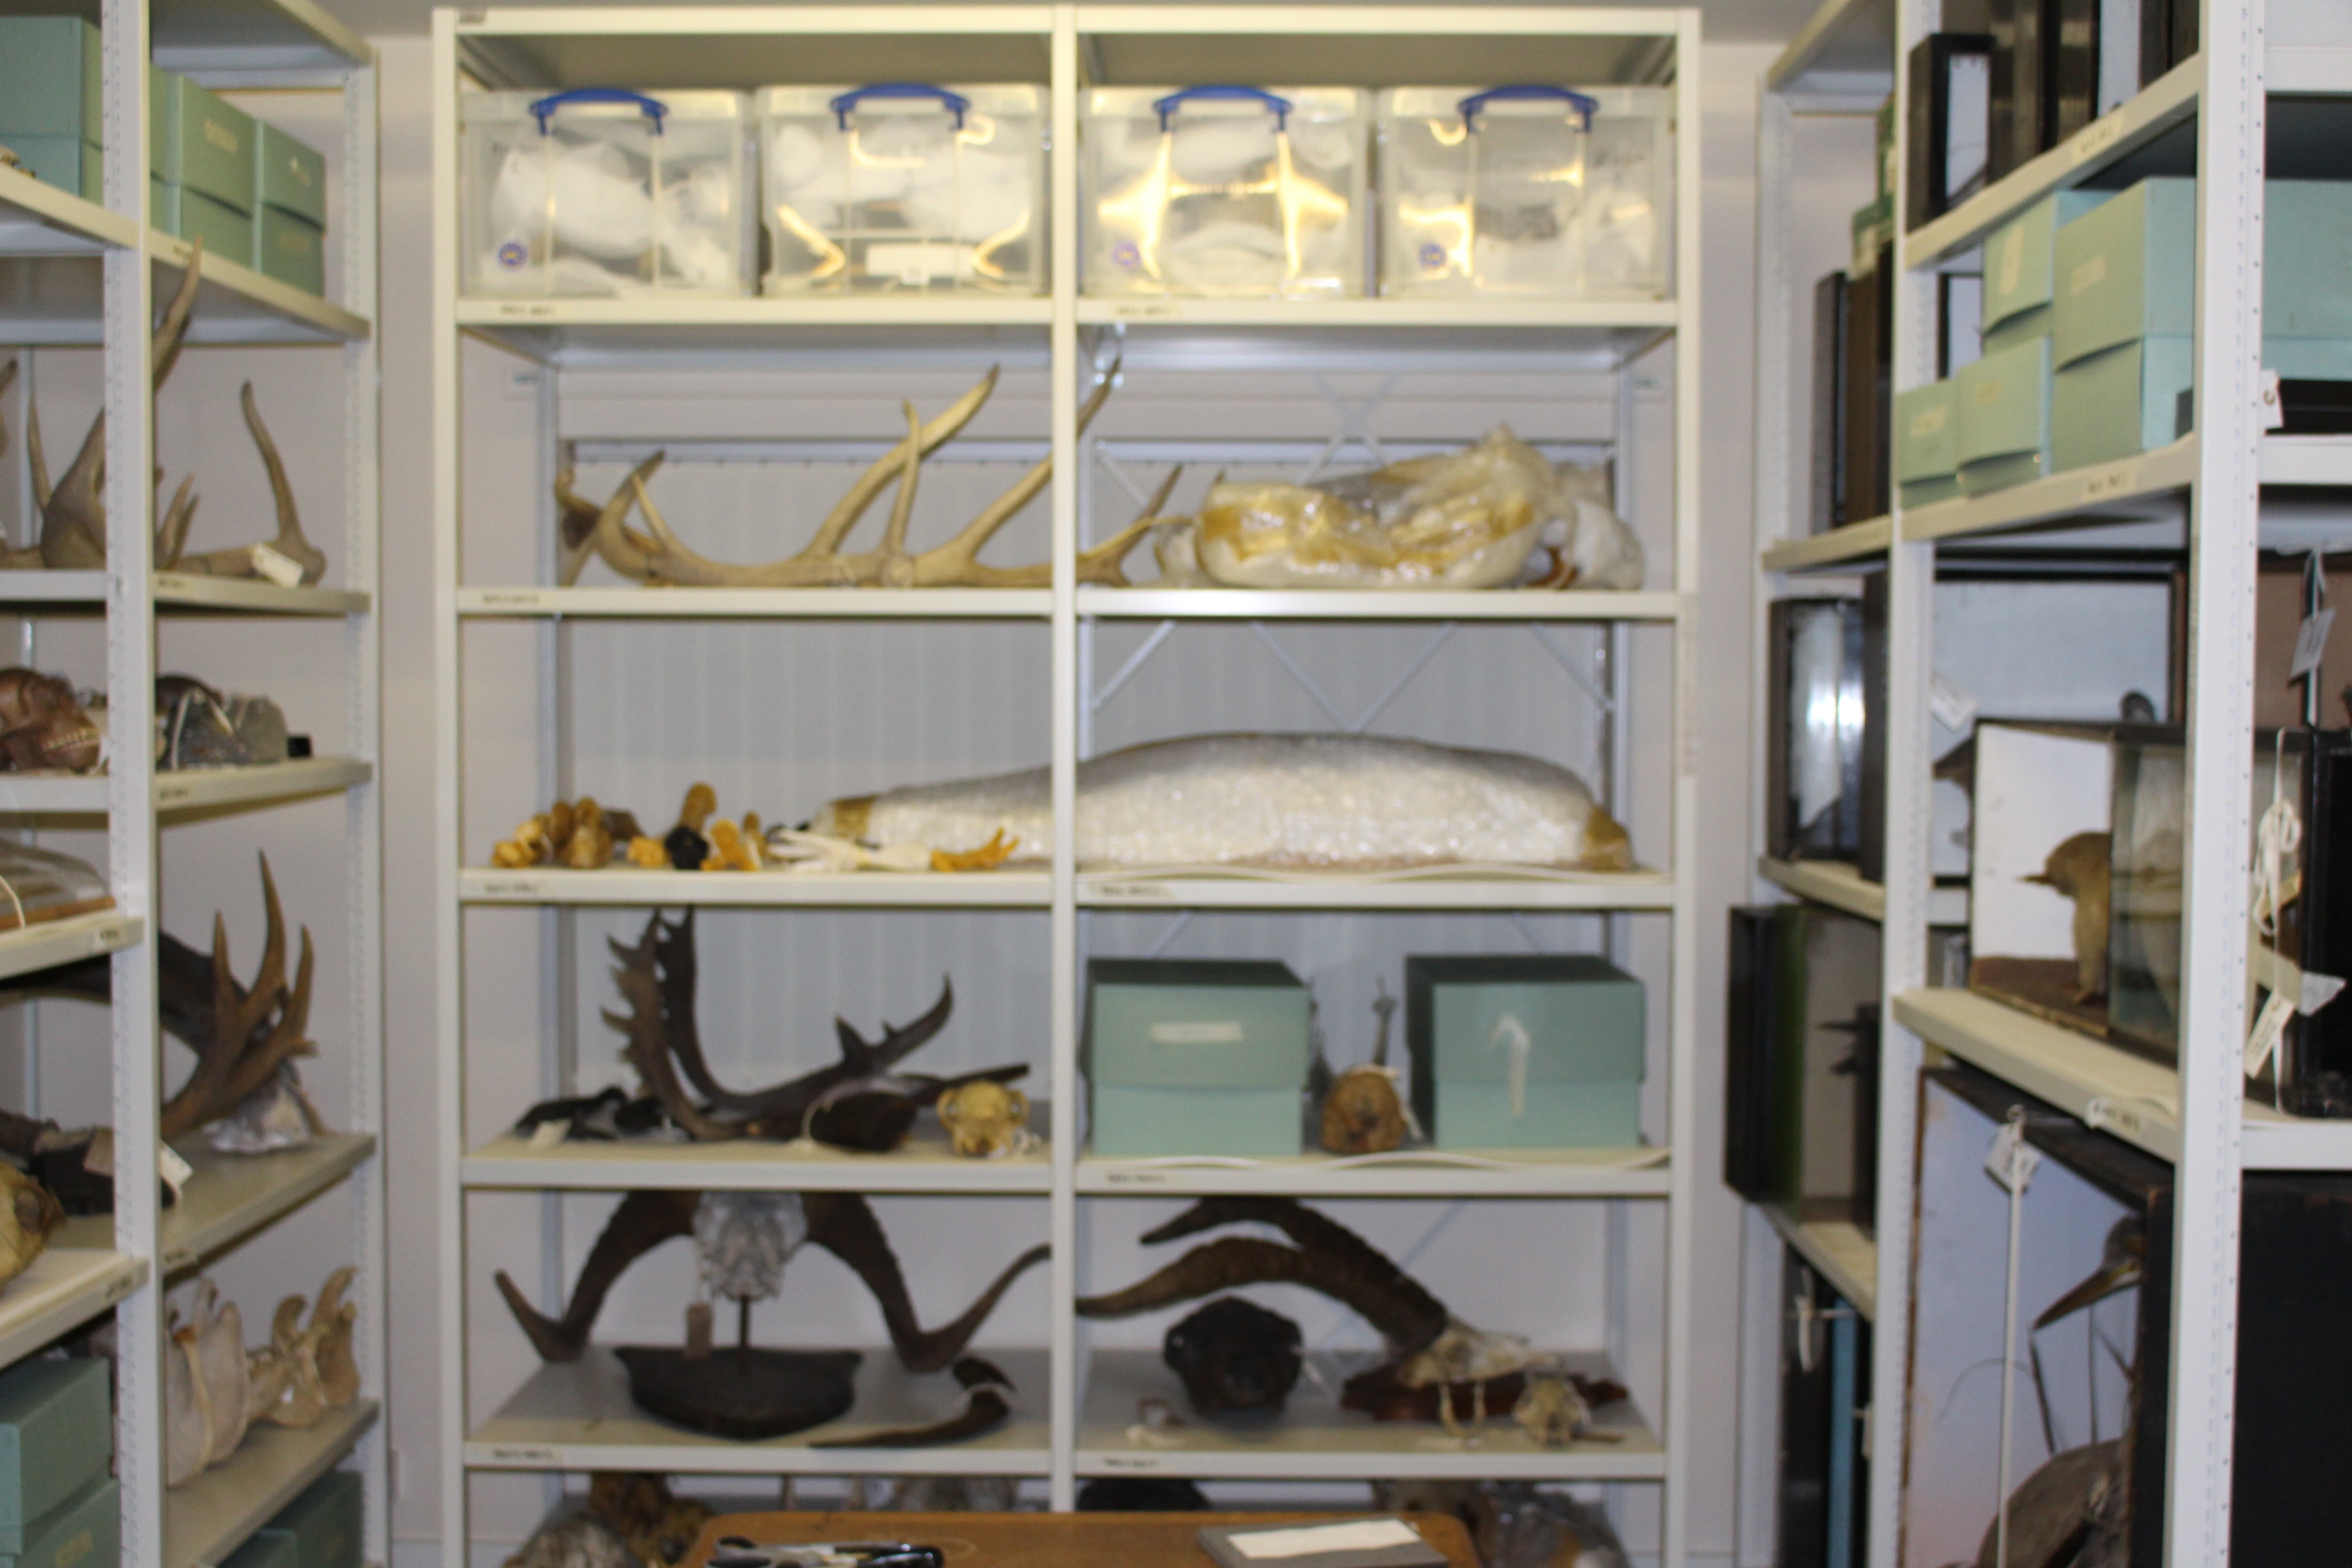 mammalian skeletal material, trophy head taxidermy, zoological taxidermy, birds’ eggs, a spirit collection and plant and seed material.